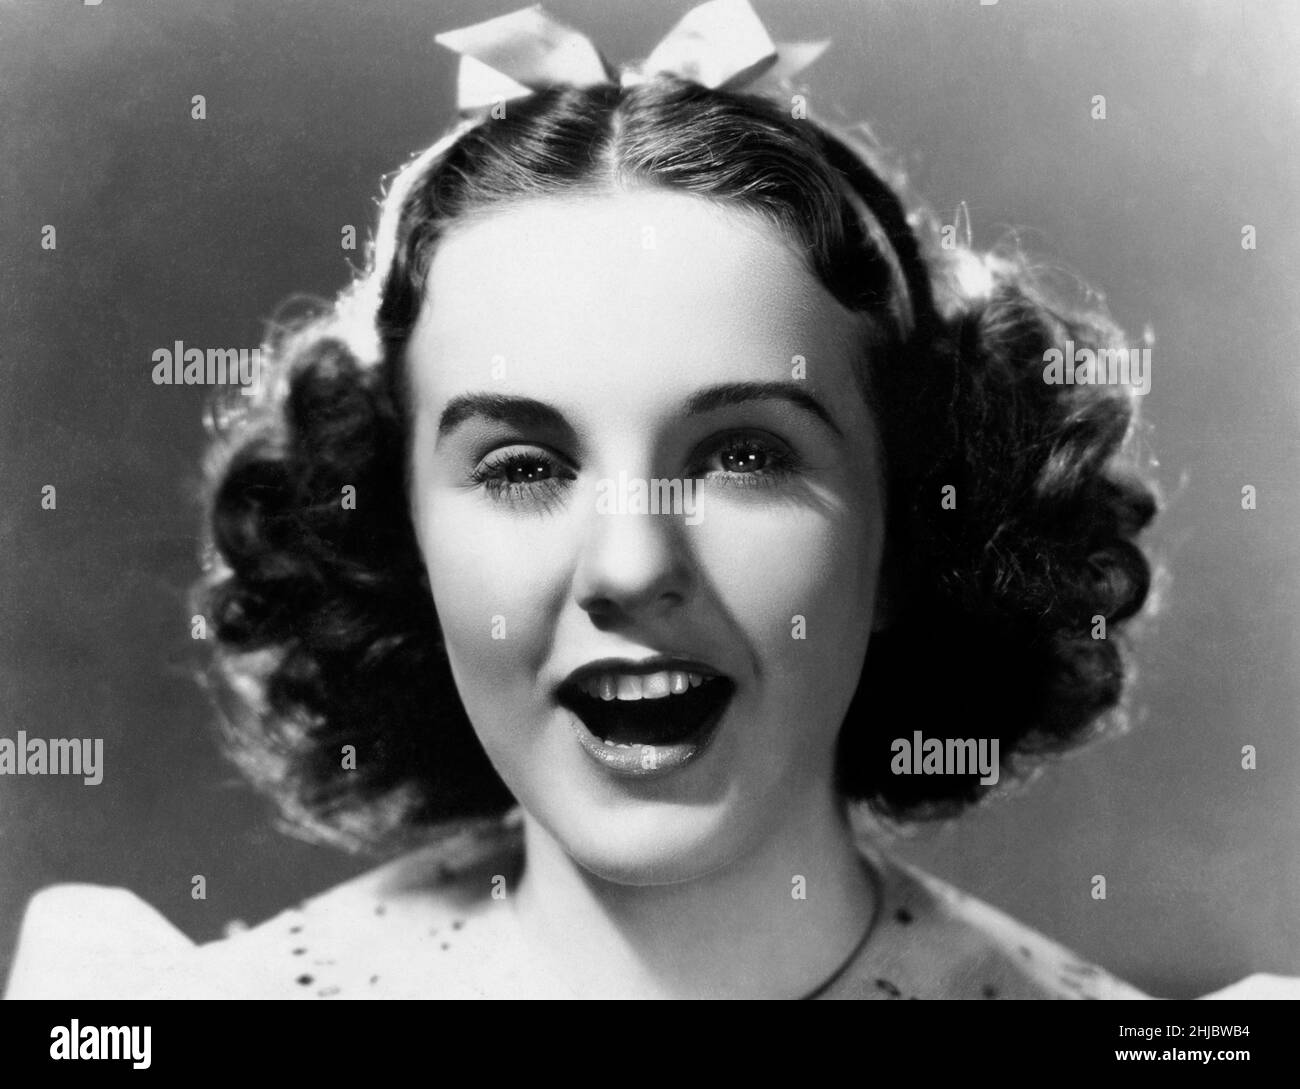 Deanna Durbin Portrait for 'One Hundred Men and a Girl' USA, 1937 Director: Henry Koster Stock Photo